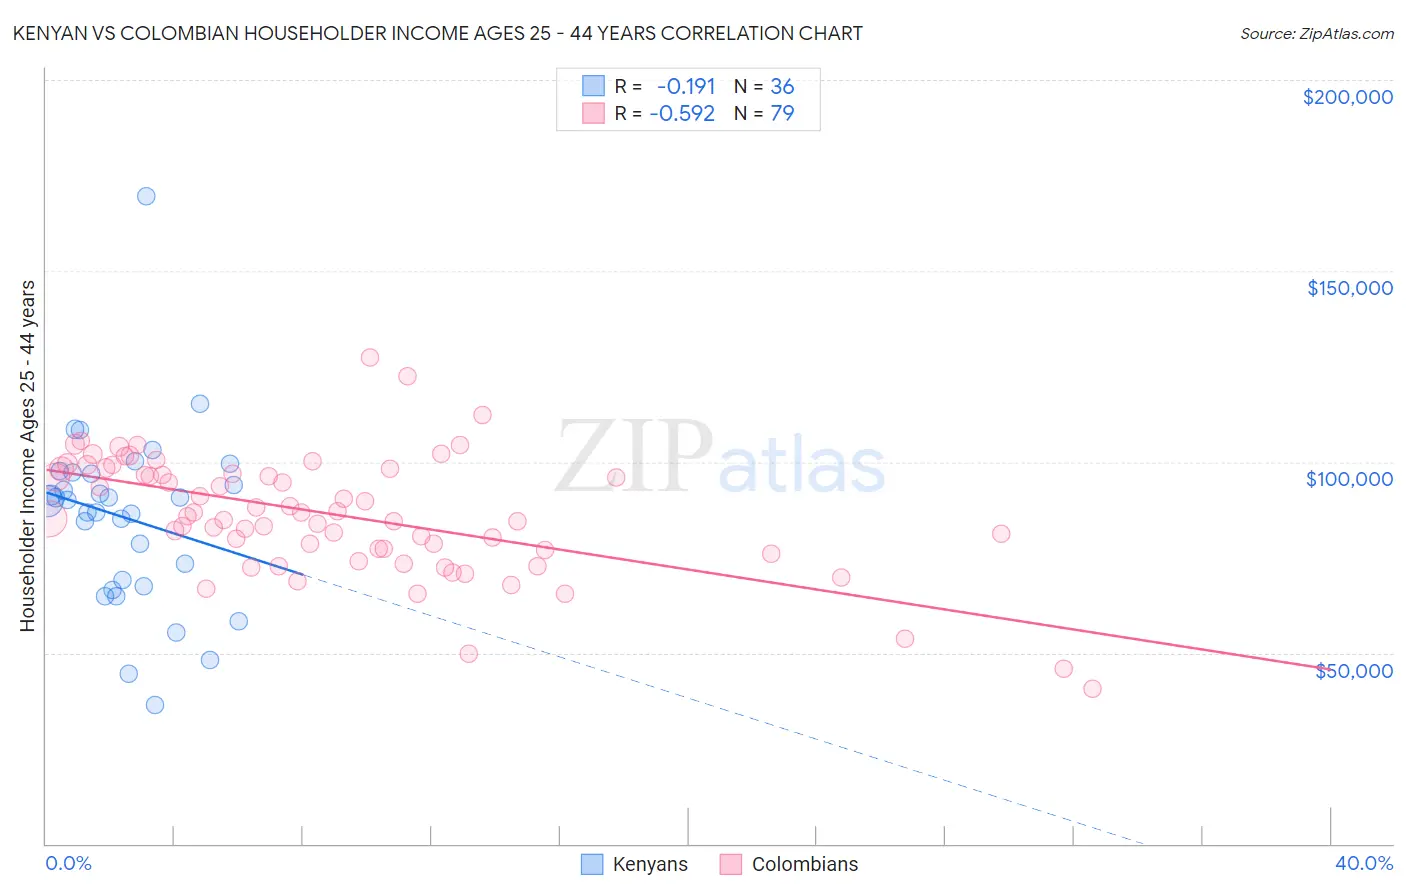 Kenyan vs Colombian Householder Income Ages 25 - 44 years